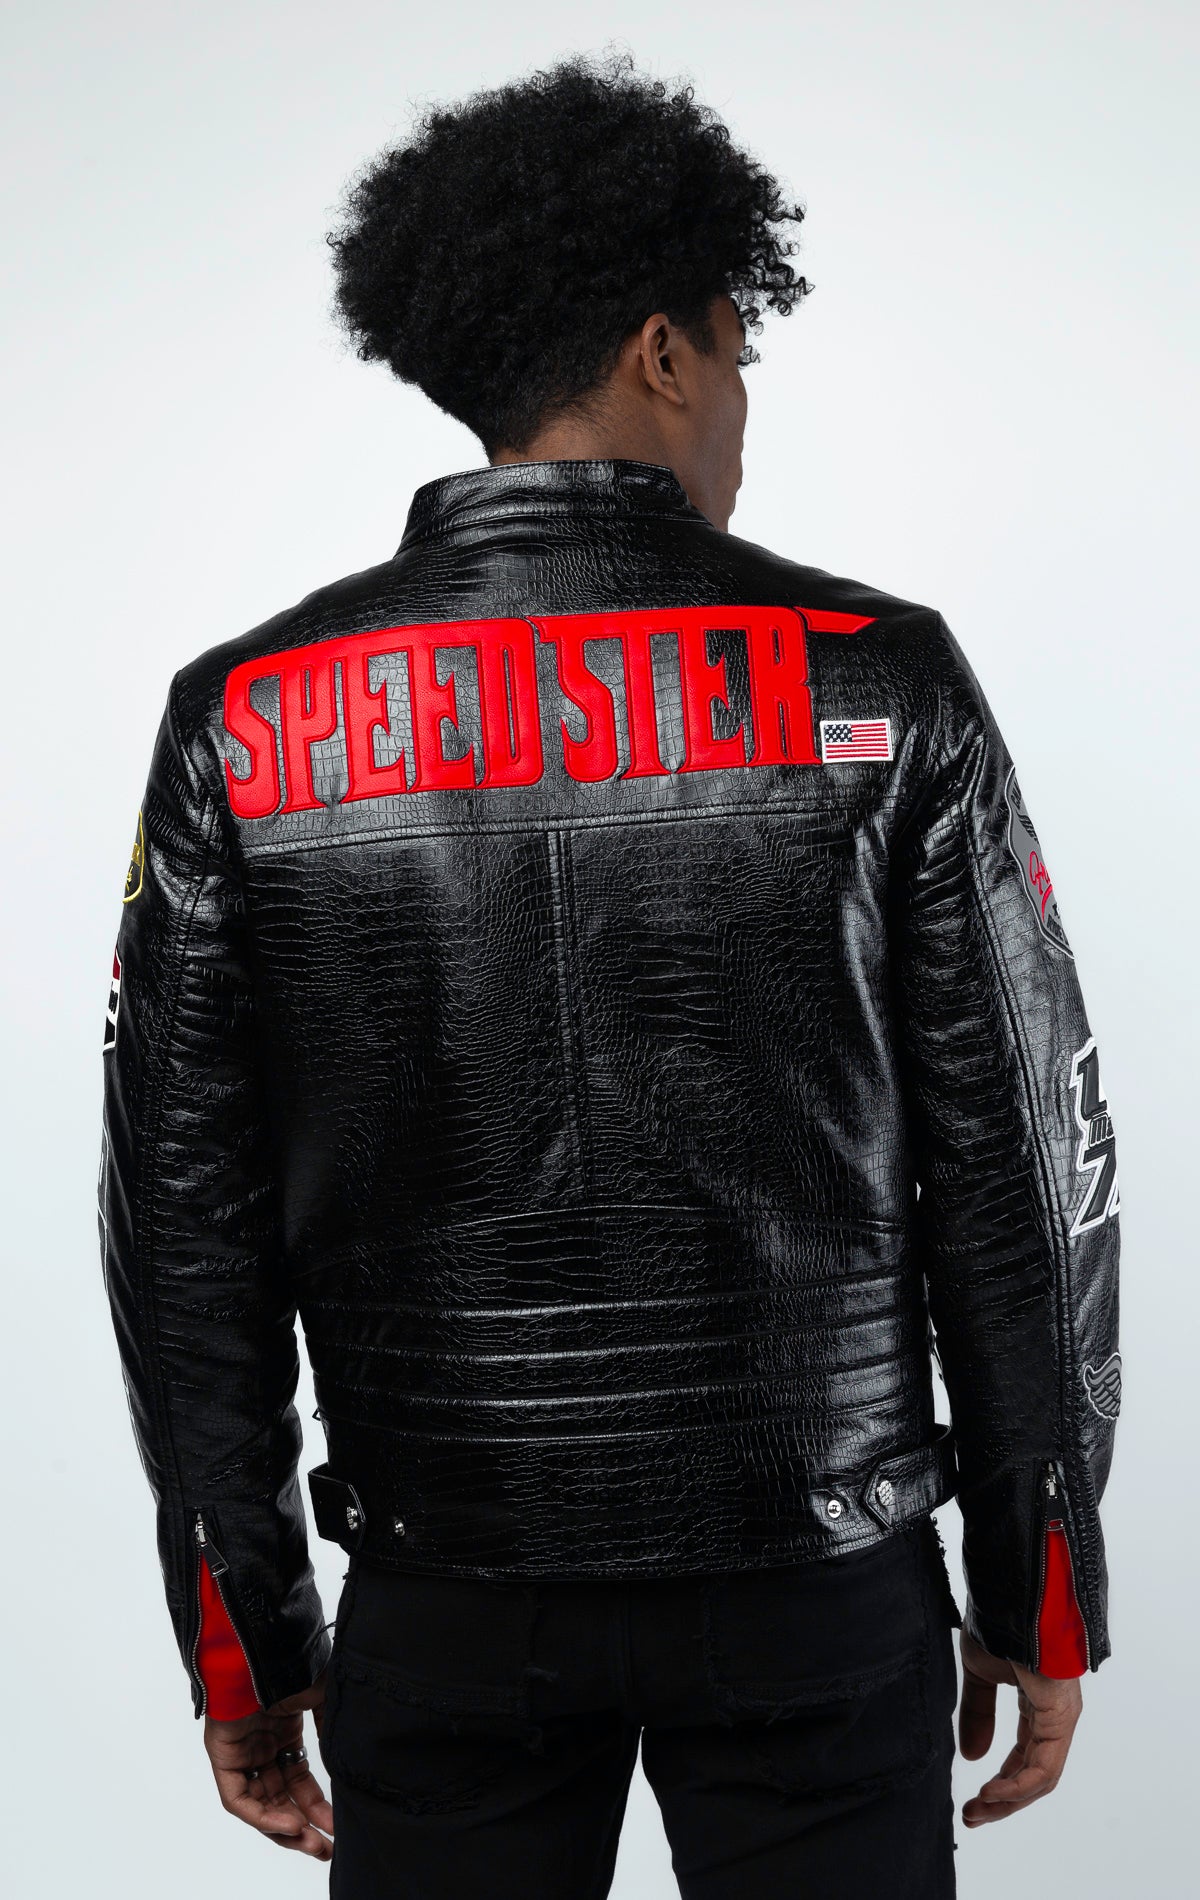 Black Leather motorcycle jacket featuring a bold "Speedster" graphic on the back. This varsity style jacket includes ribbed cuffs and collar, and a sleek silver zipper closure